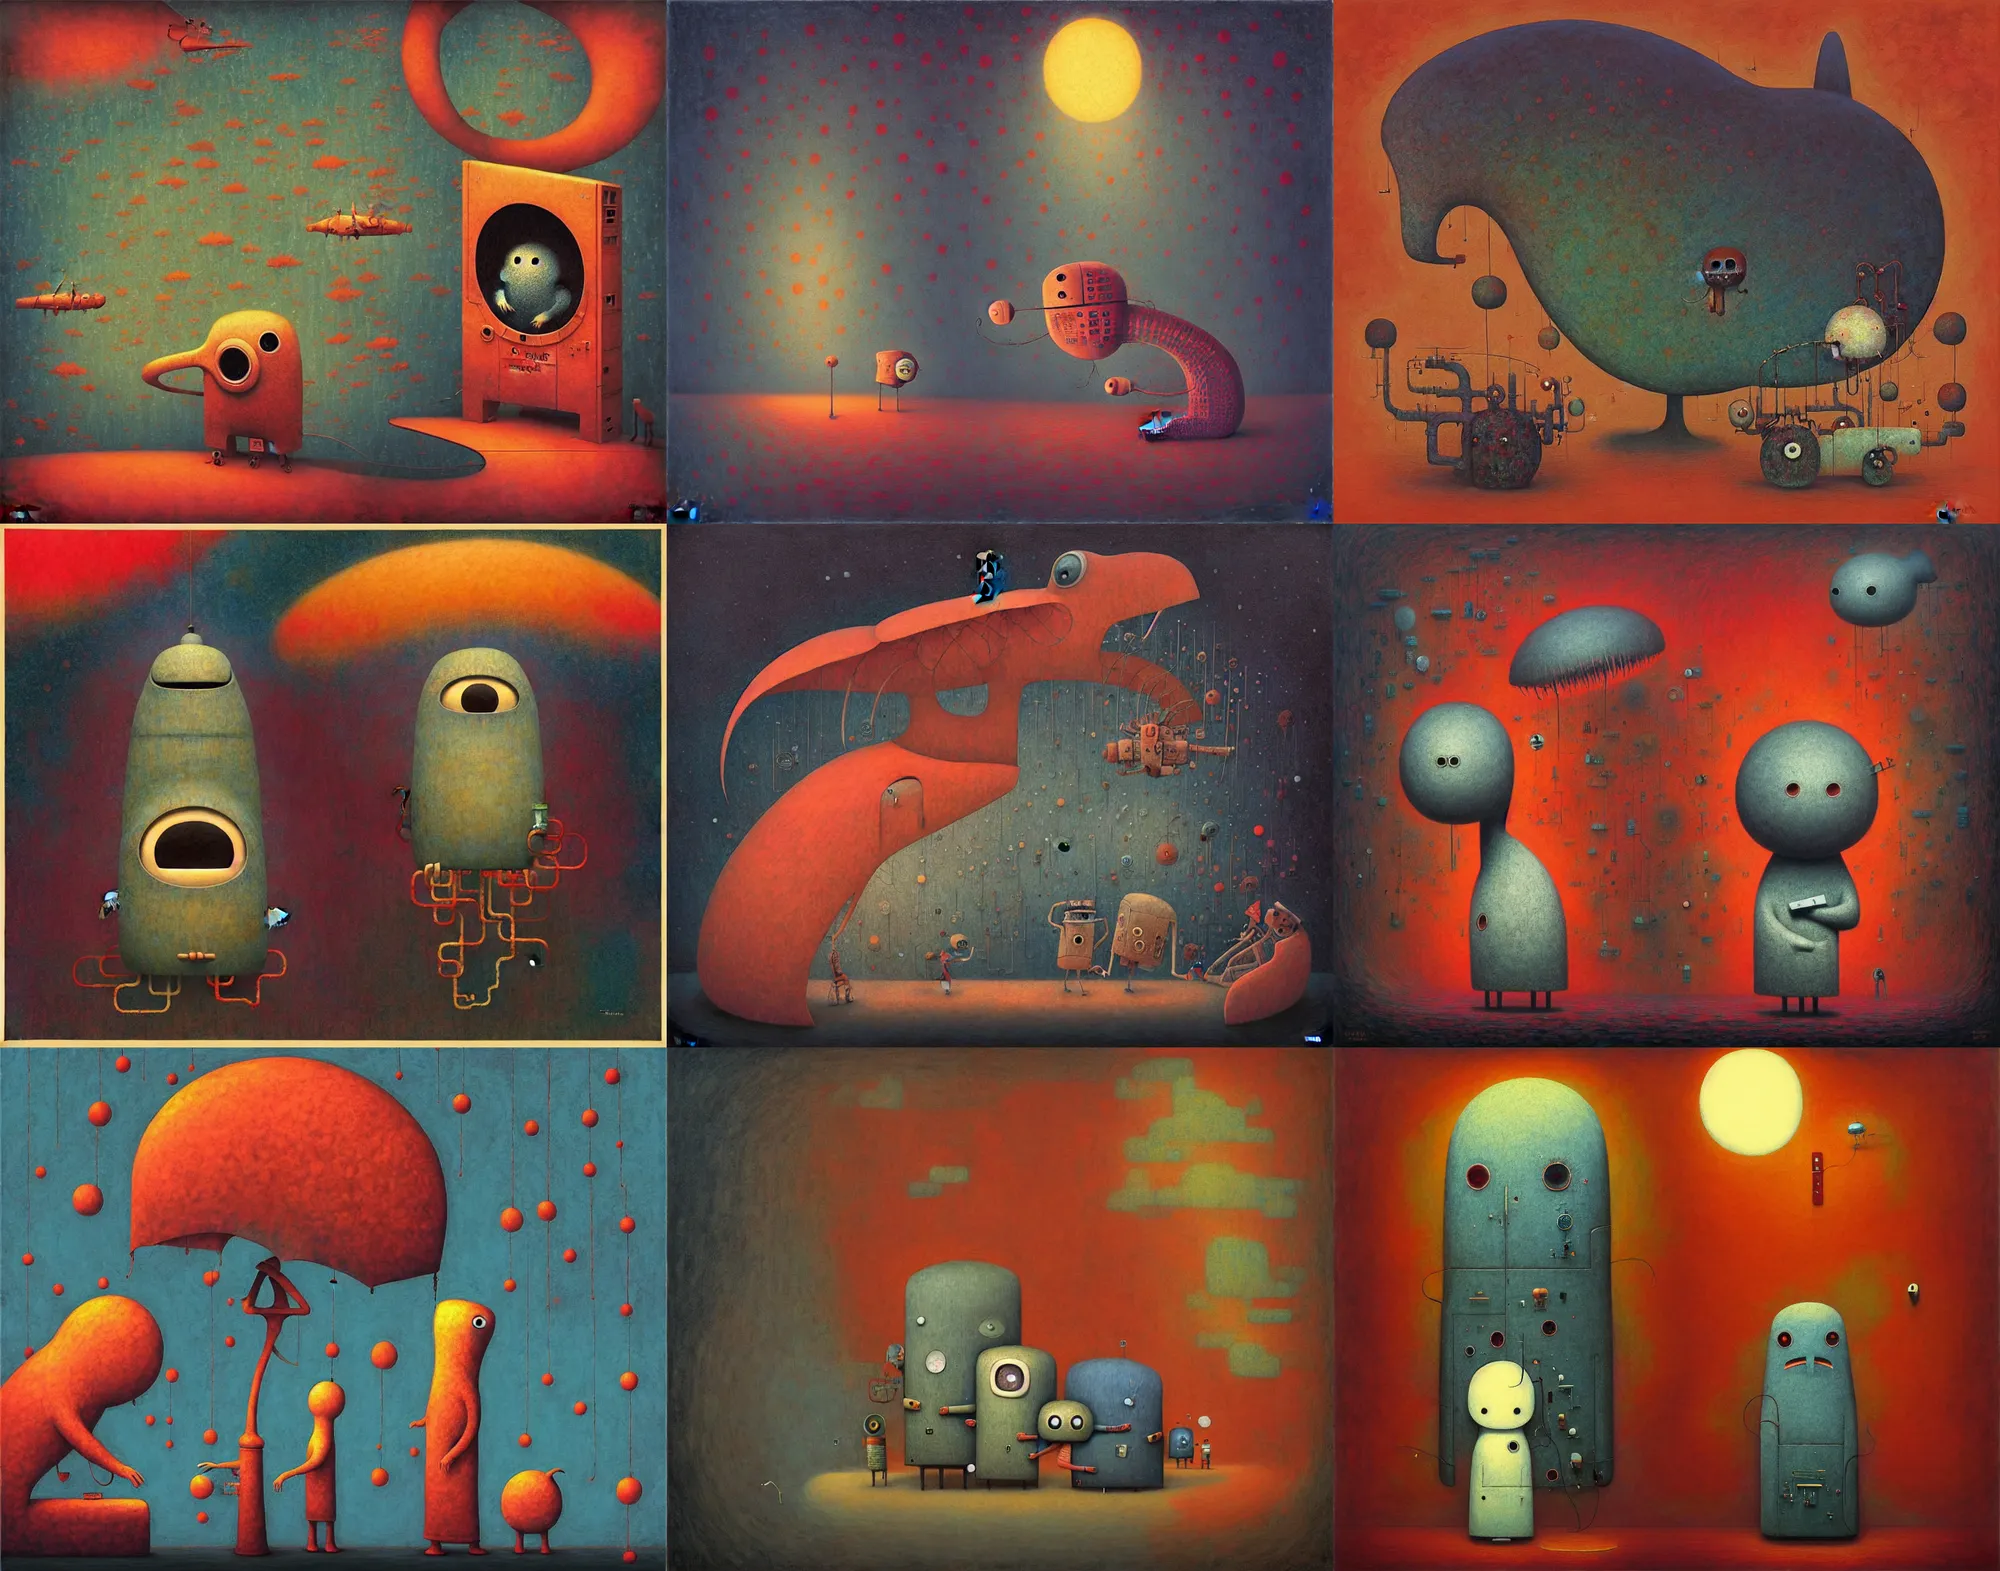 Prompt: ( ( ( ( the end ) ) ) ) by shaun tan!!!!!!!!!!!!!!!!!!!!!!!!!!!, overdetailed art, colorful, artistic record jacket design